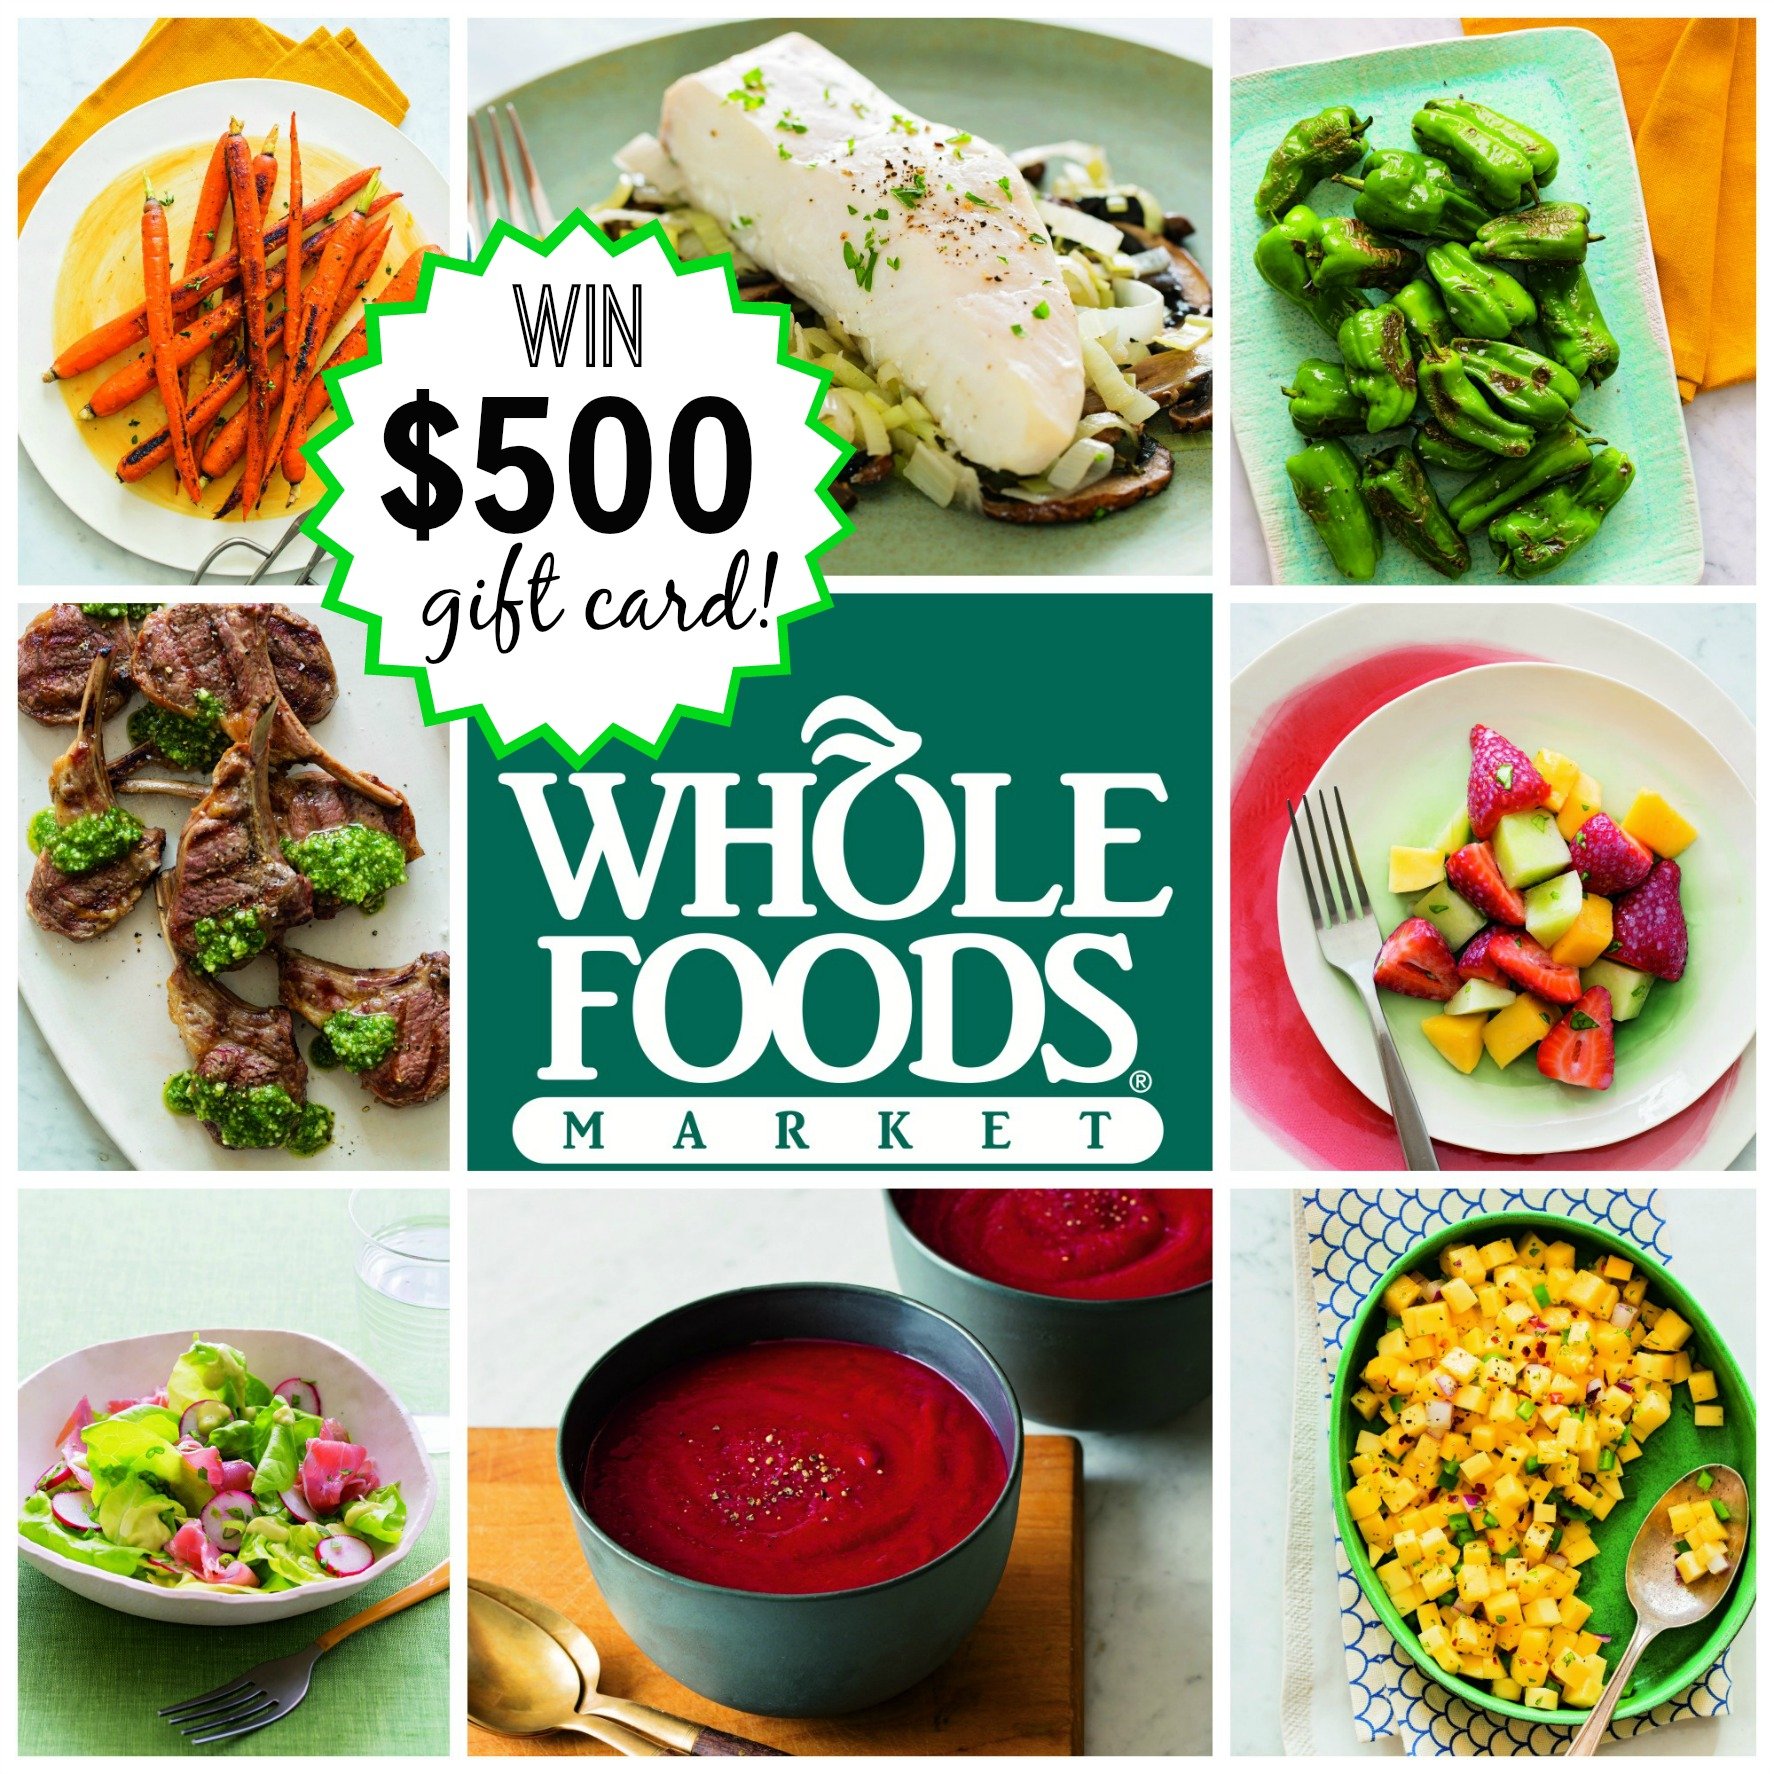 win-500-gift-card-to-whole-foods-up-and-alive